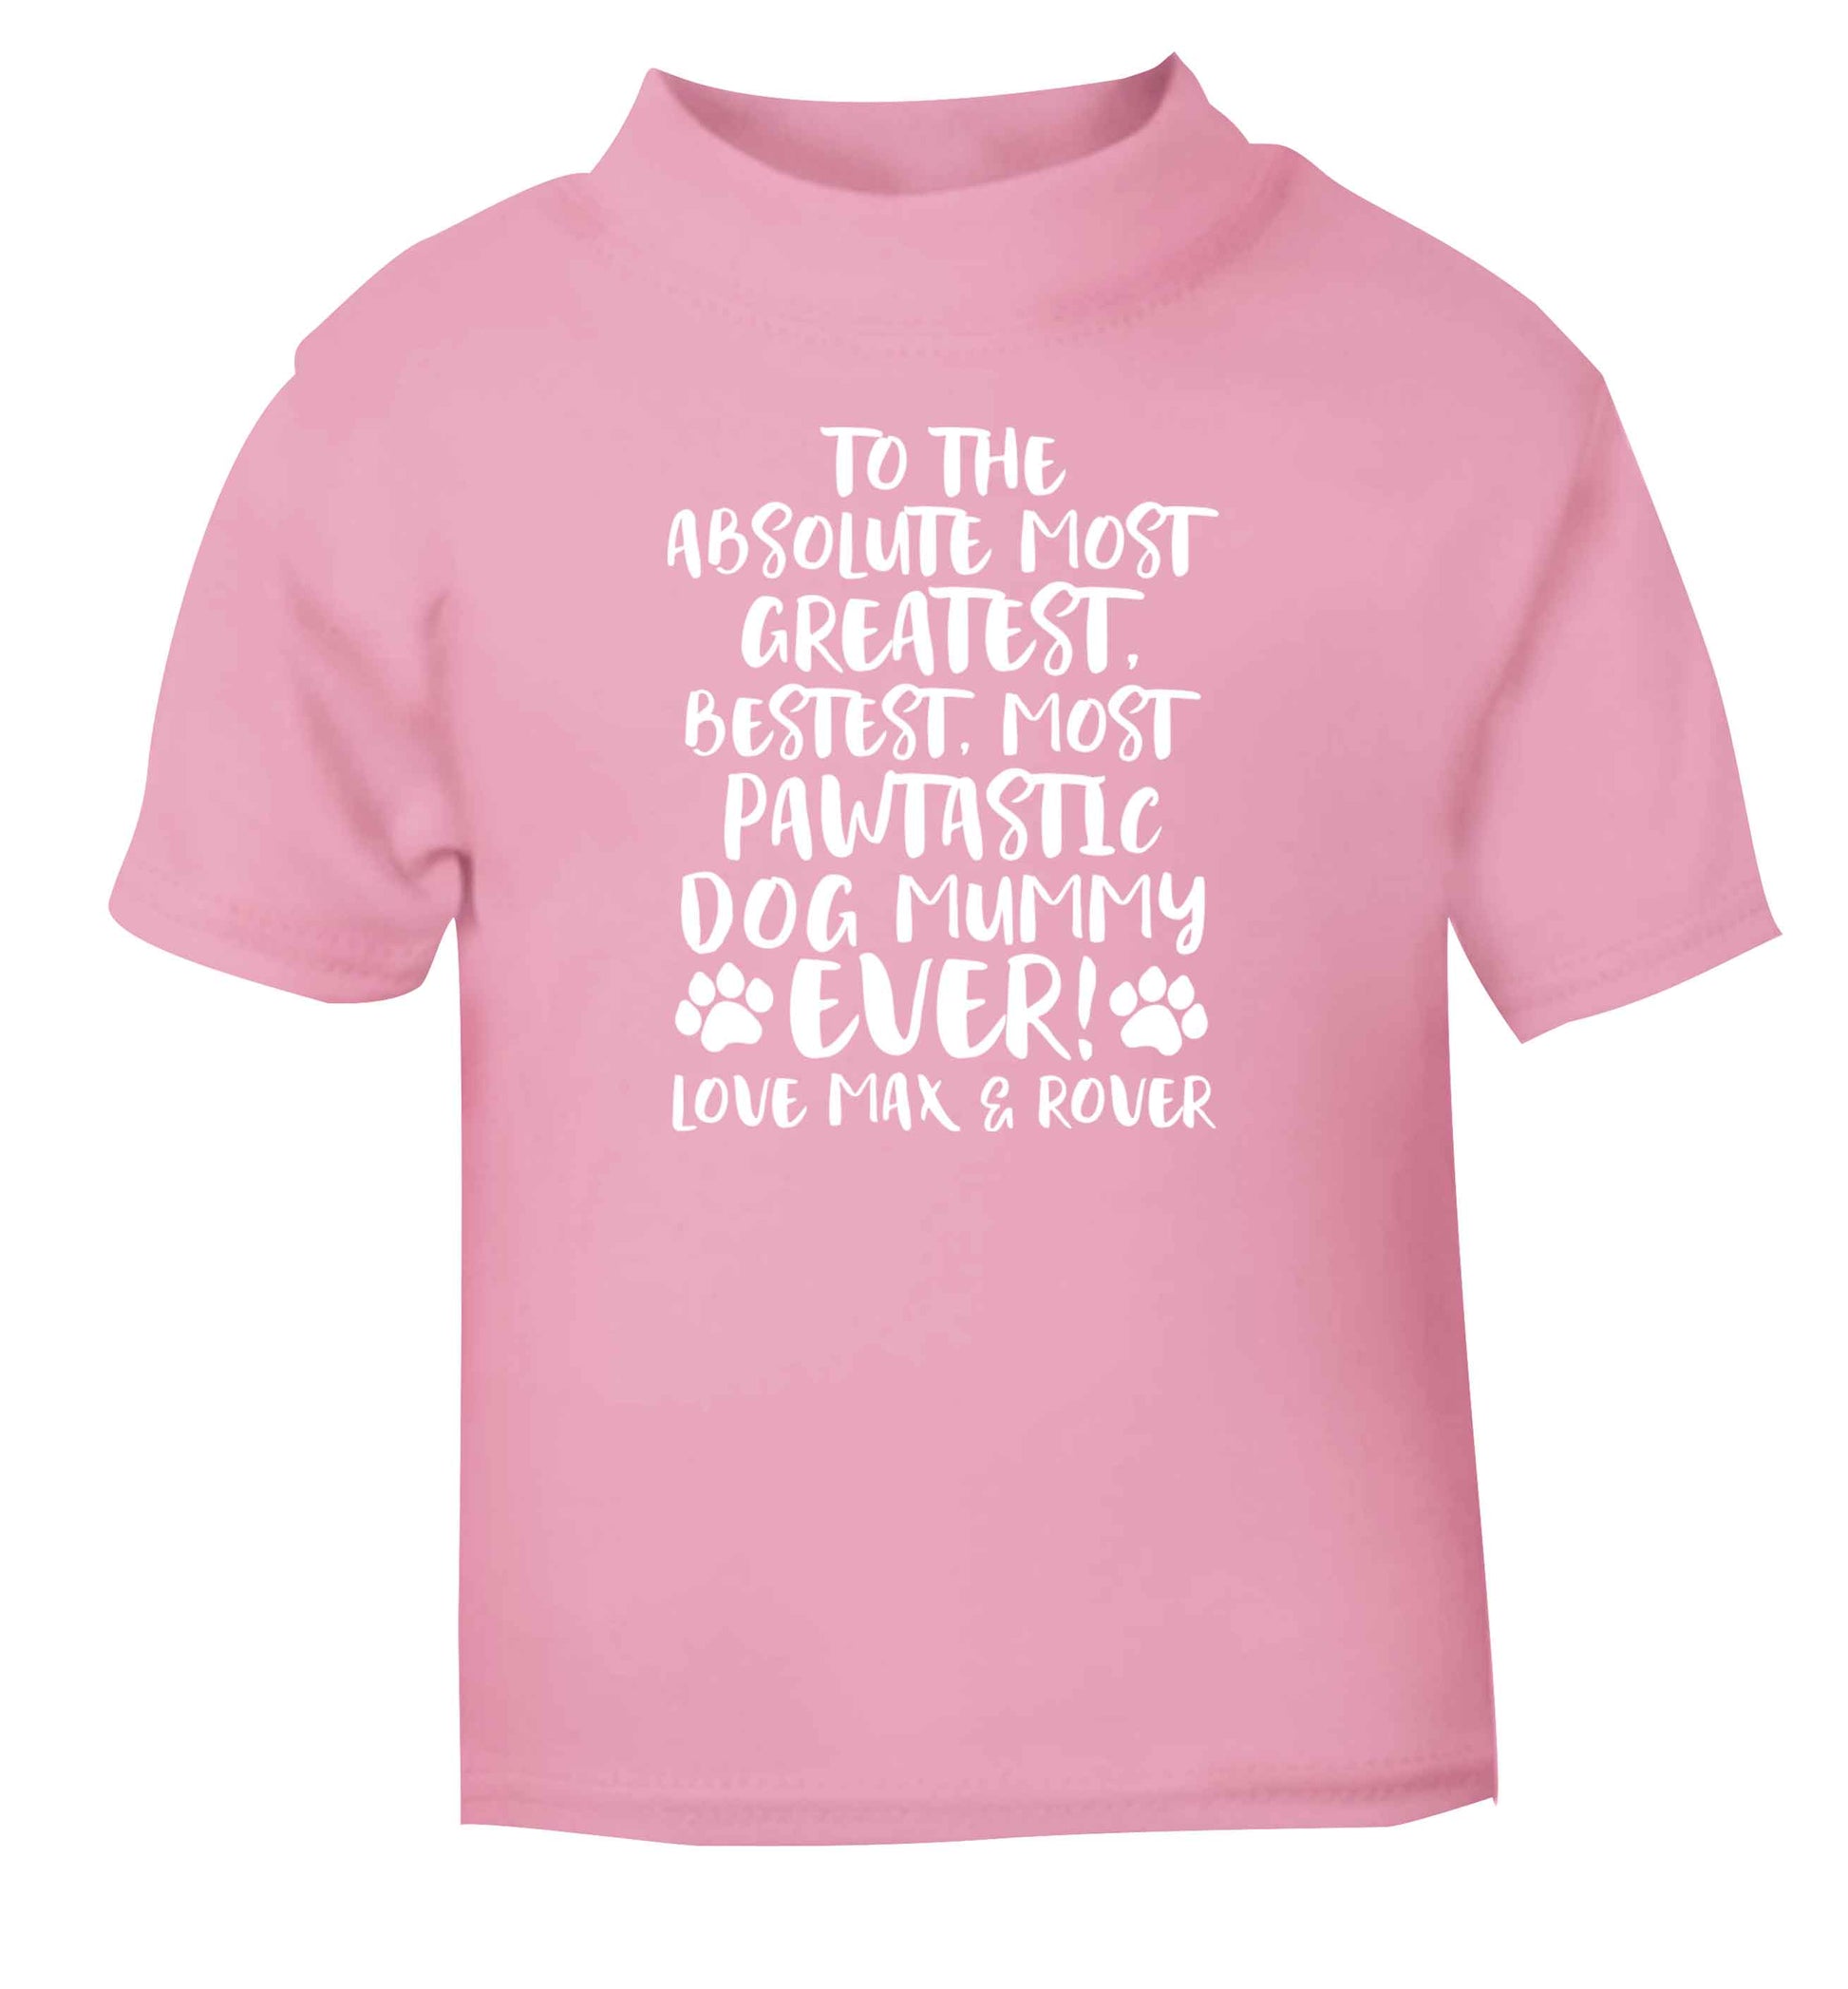 Personalsied to the most pawtastic dog mummy ever light pink Baby Toddler Tshirt 2 Years